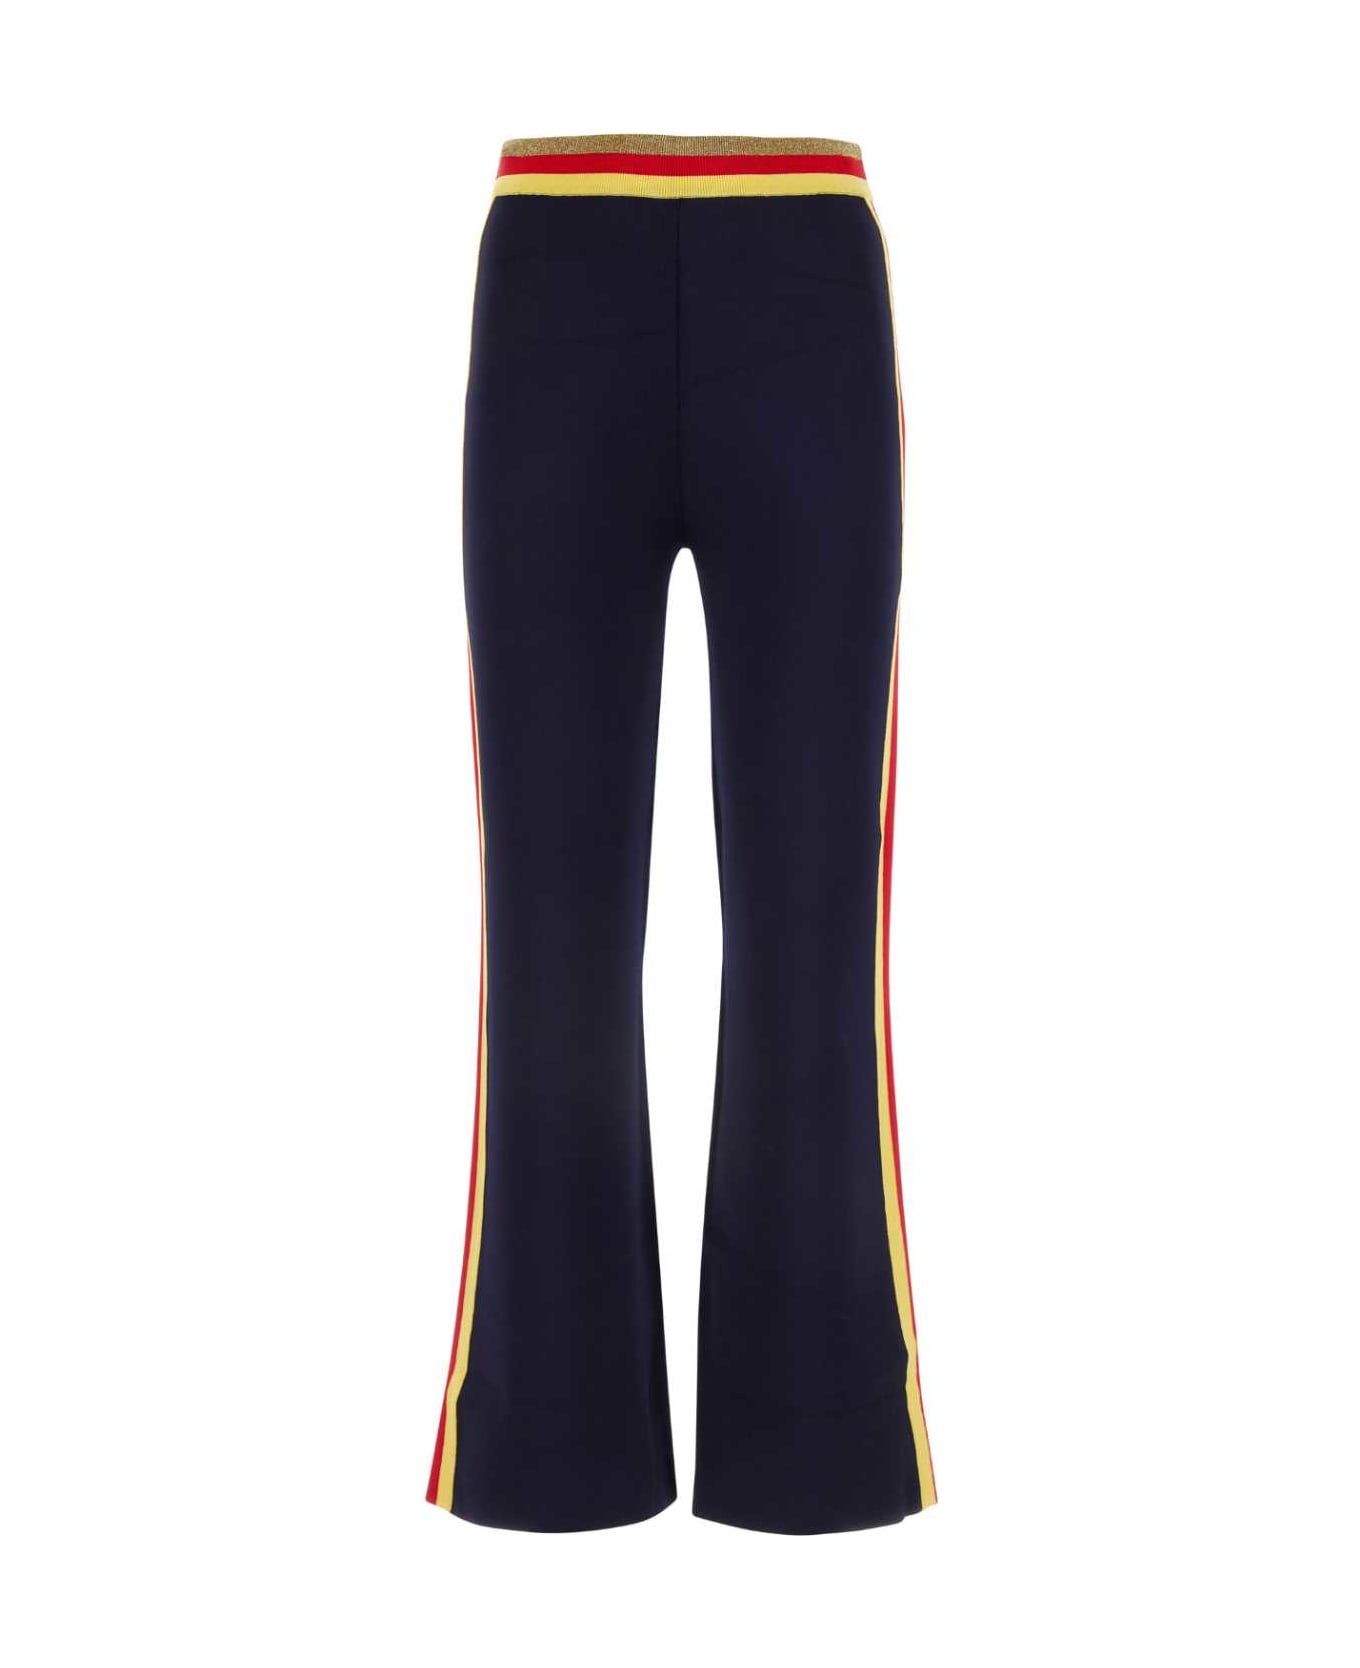 Paco Rabanne Multicolor Stretch Viscose Blend Joggers - NAVYGOLD